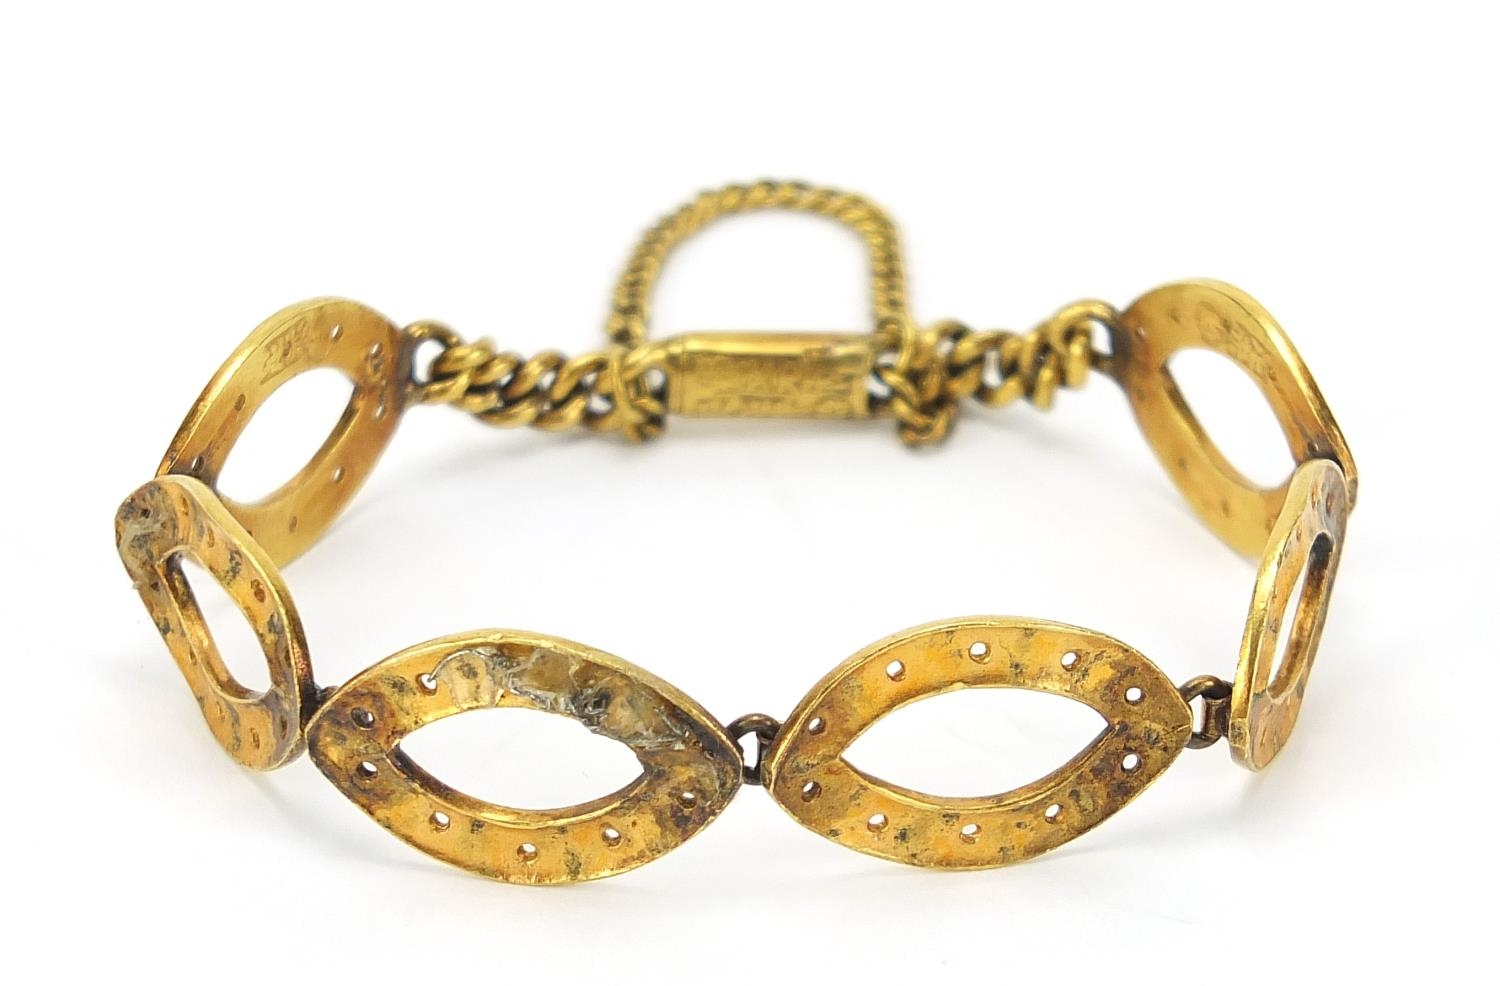 Chinese gold bracelet (tests as 18ct+ gold), impressed character 